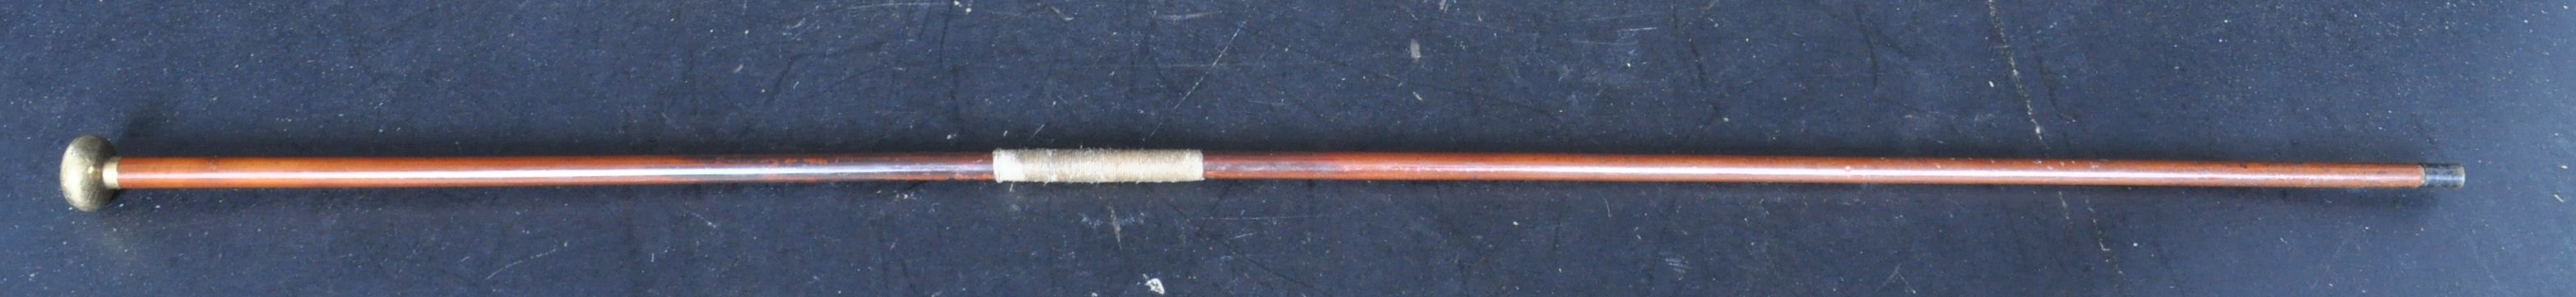 19TH CENTURY FRENCH WALKING STICK WITH 18CT GOLD KNOB